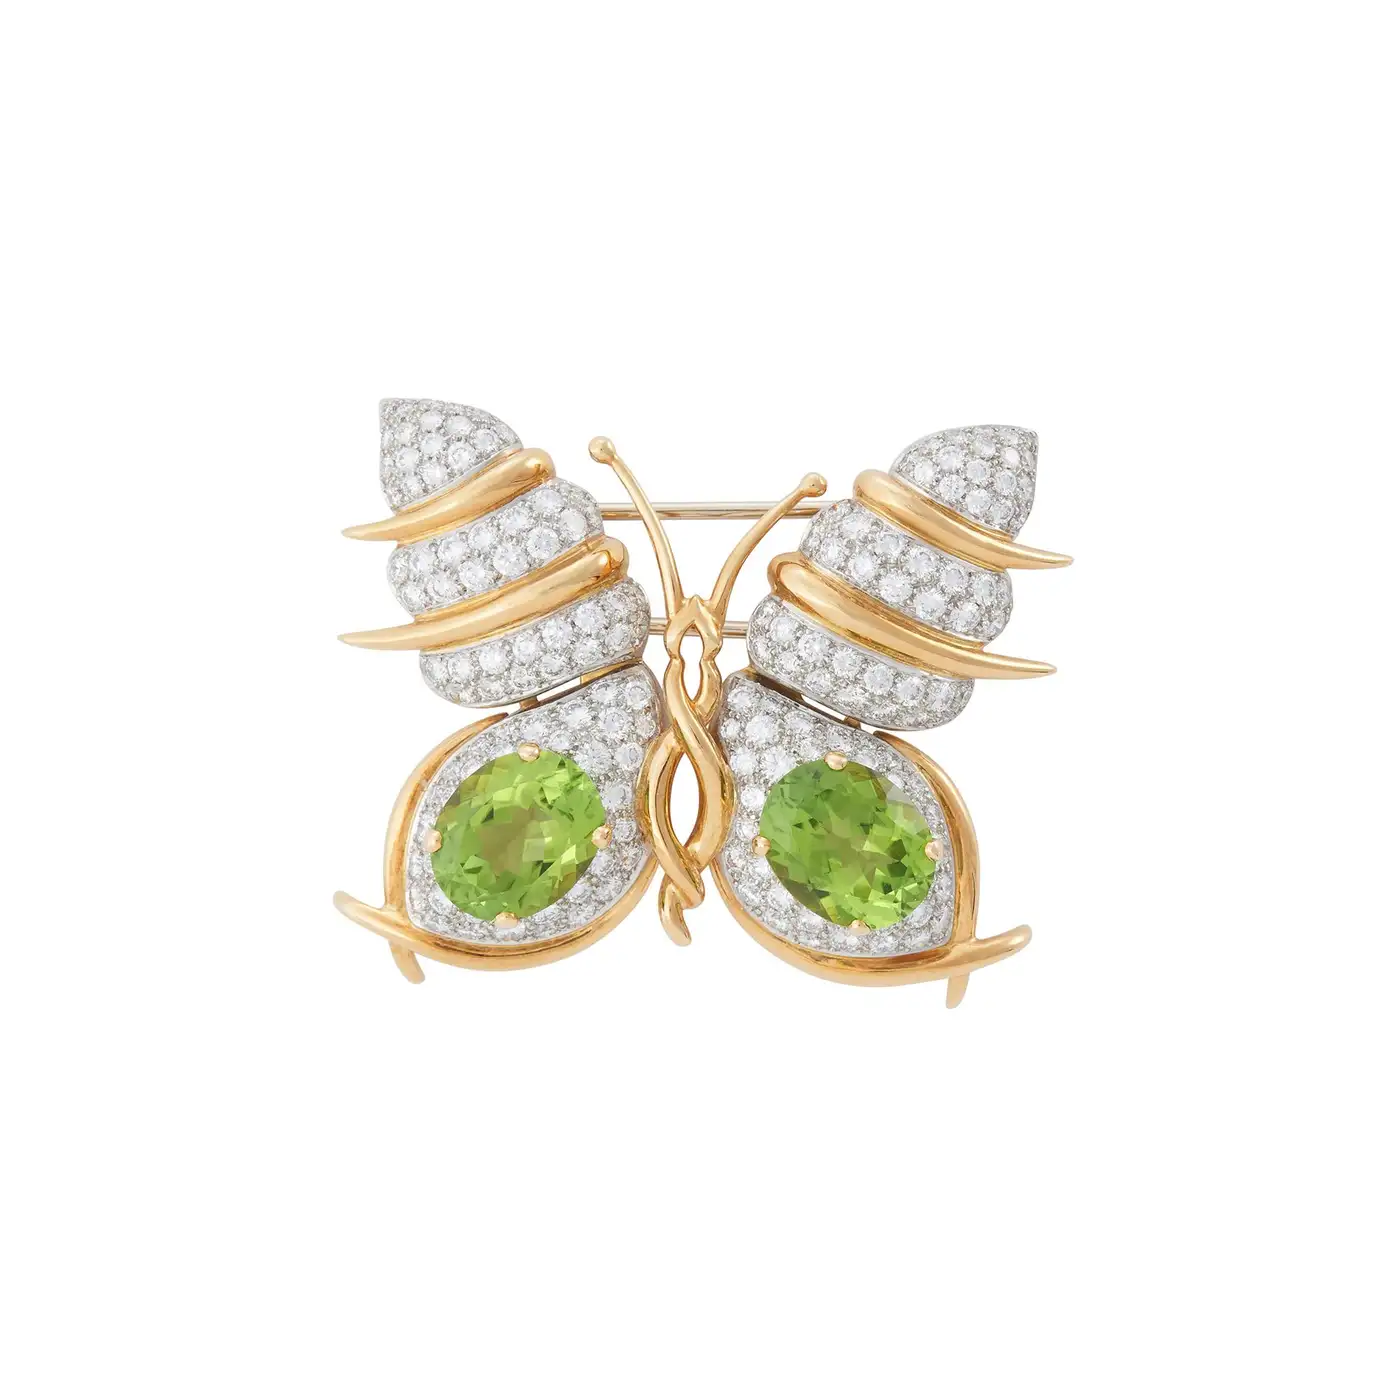 Peridot-and-Diamond-Butterfly-Brooch-Jean-Schlumberger-for-Tiffany-Co-1.webp